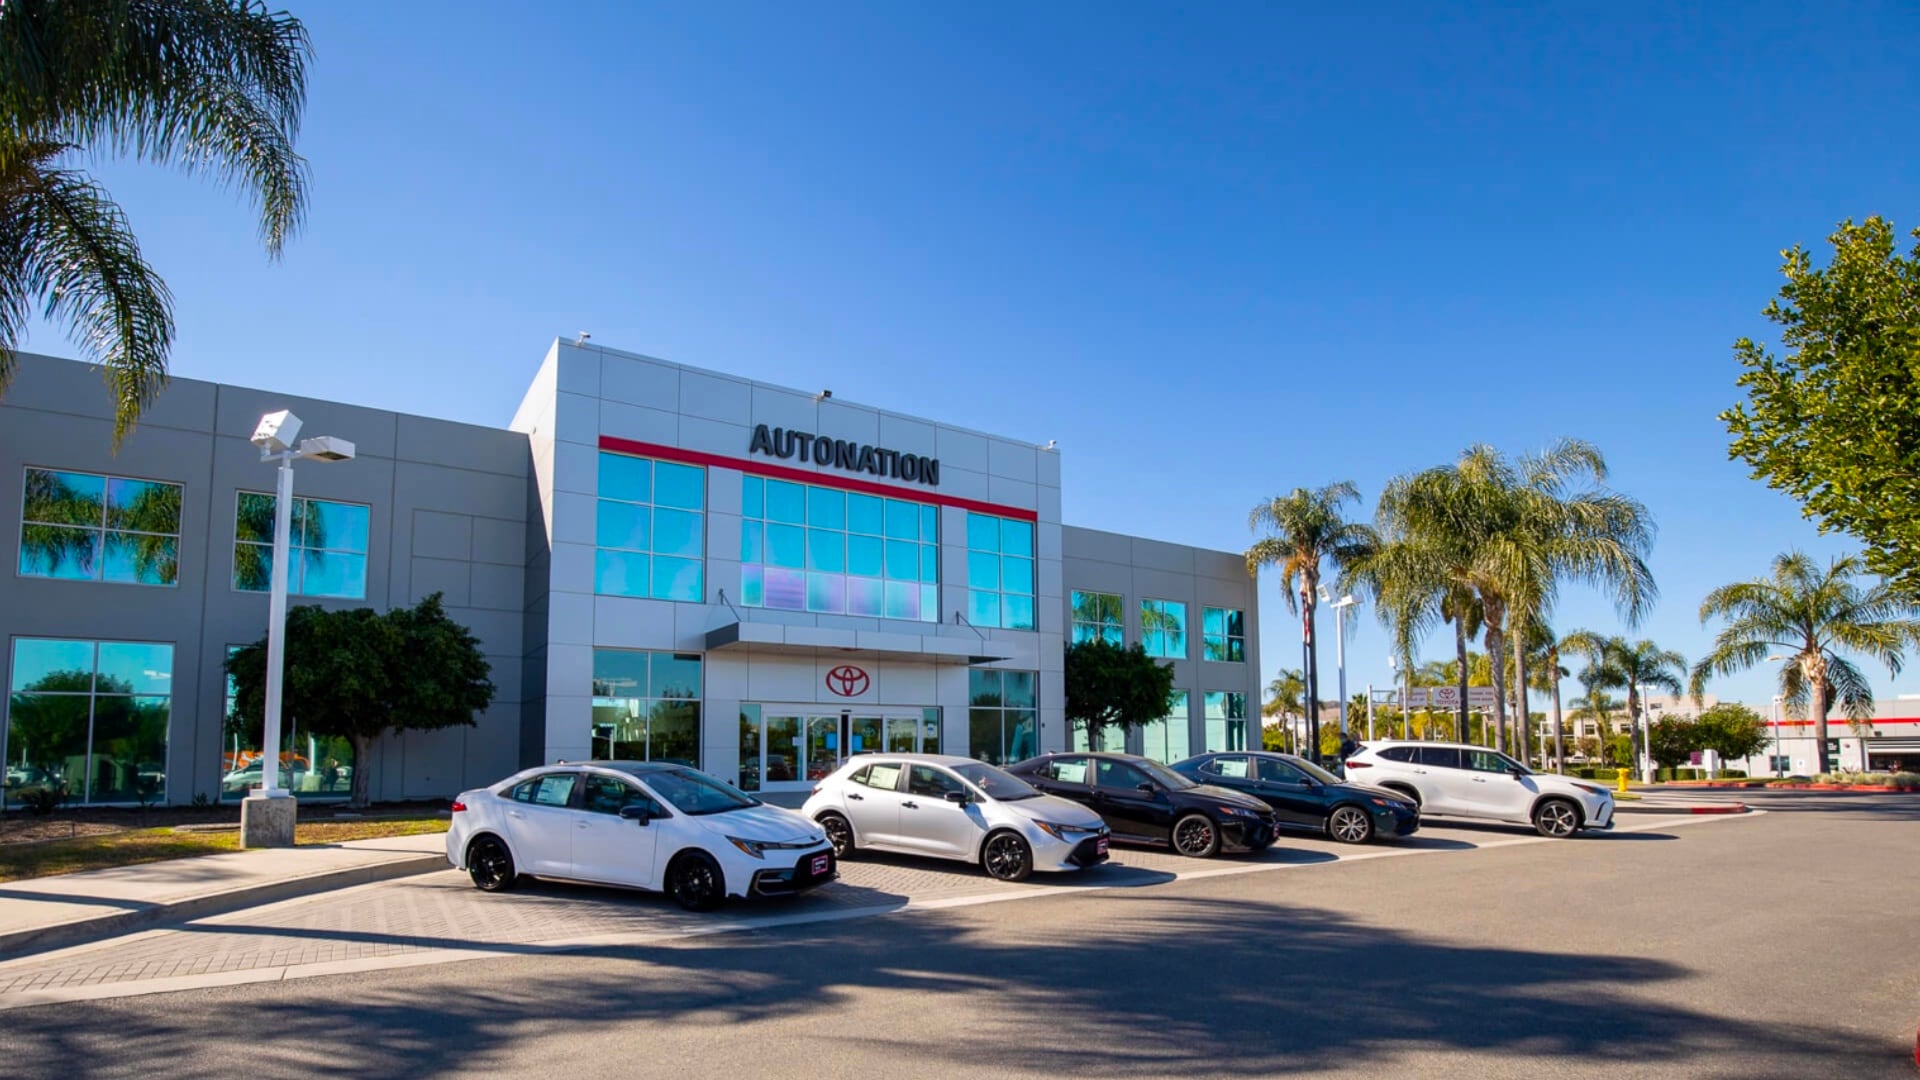 Exterior view of AutoNation Toyota Irvine. The building is grey and white and has some large windows. Many vehicles can be seen parked near the building, which has several palm trees anearby.